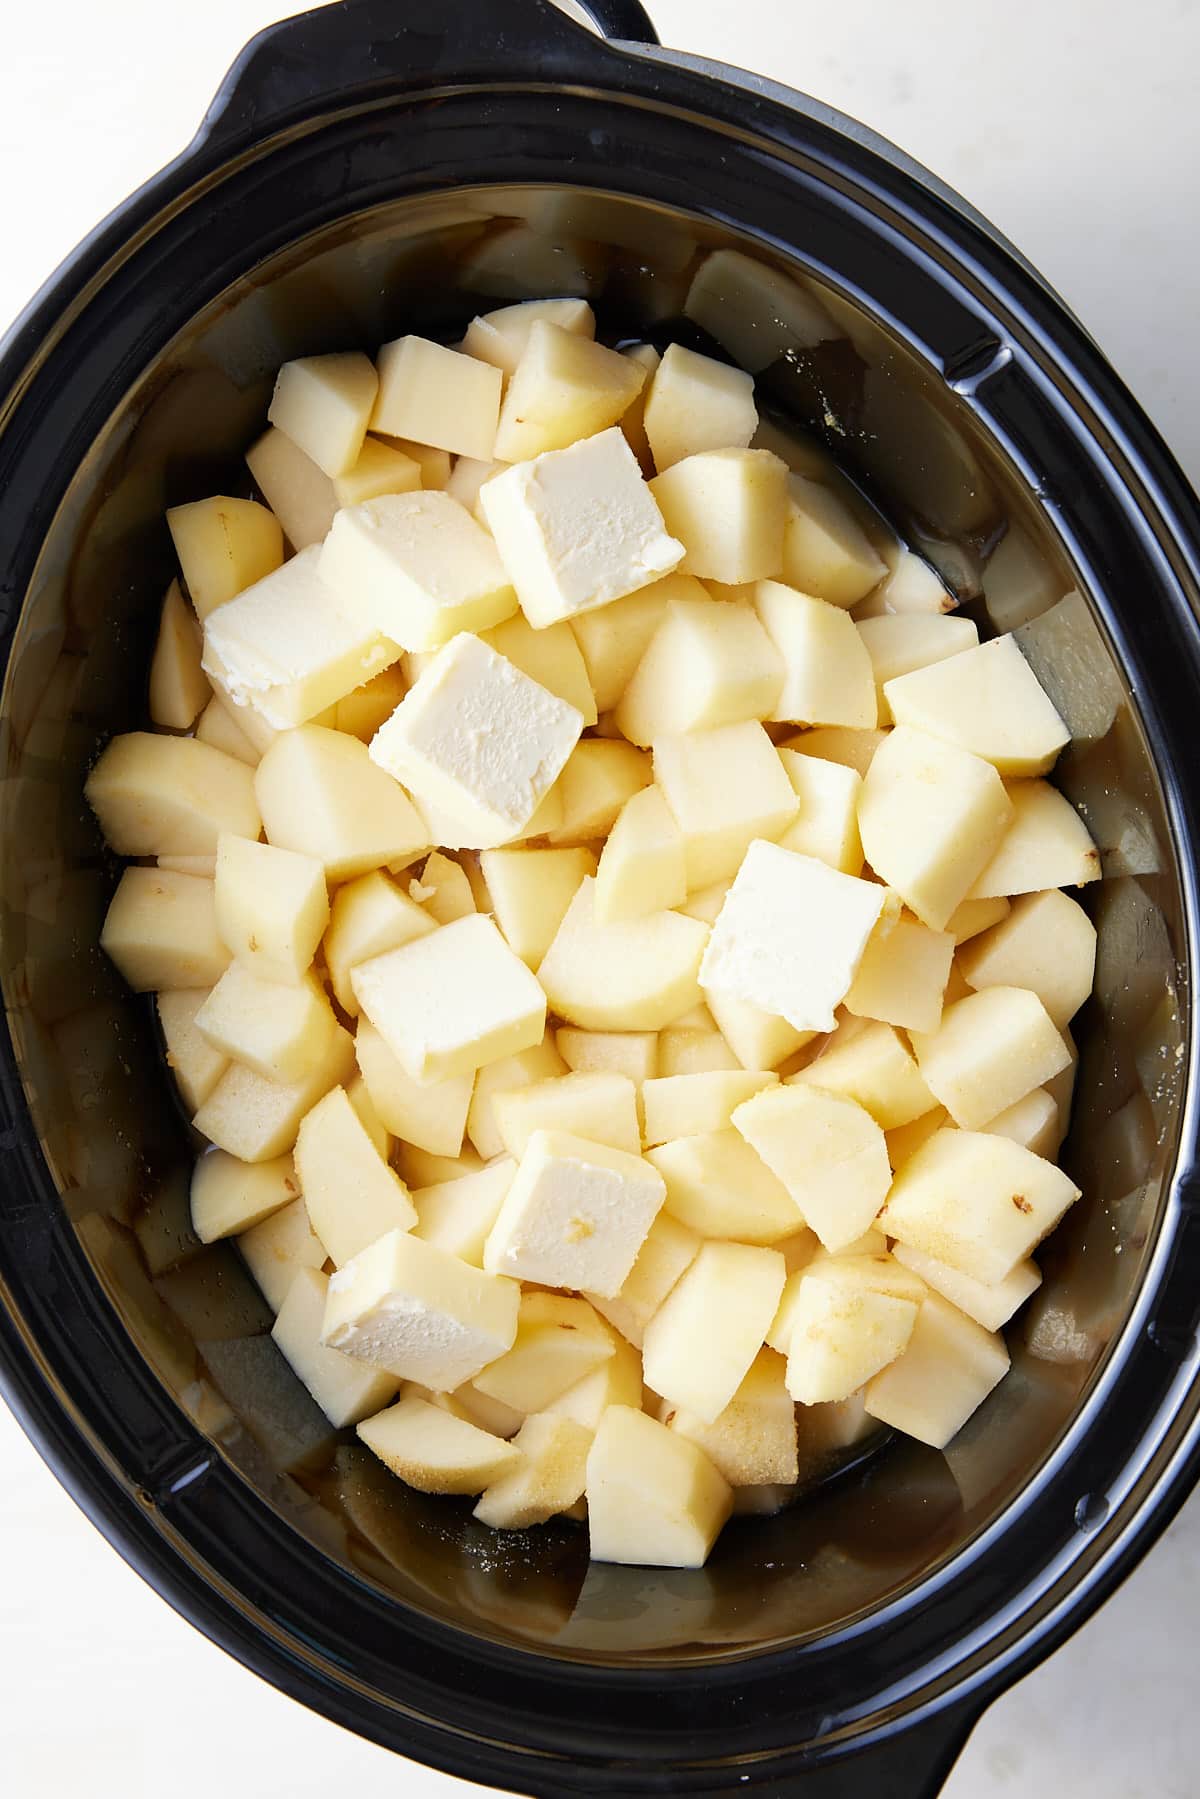 cubed potatoes in a slow cooker with butter on top